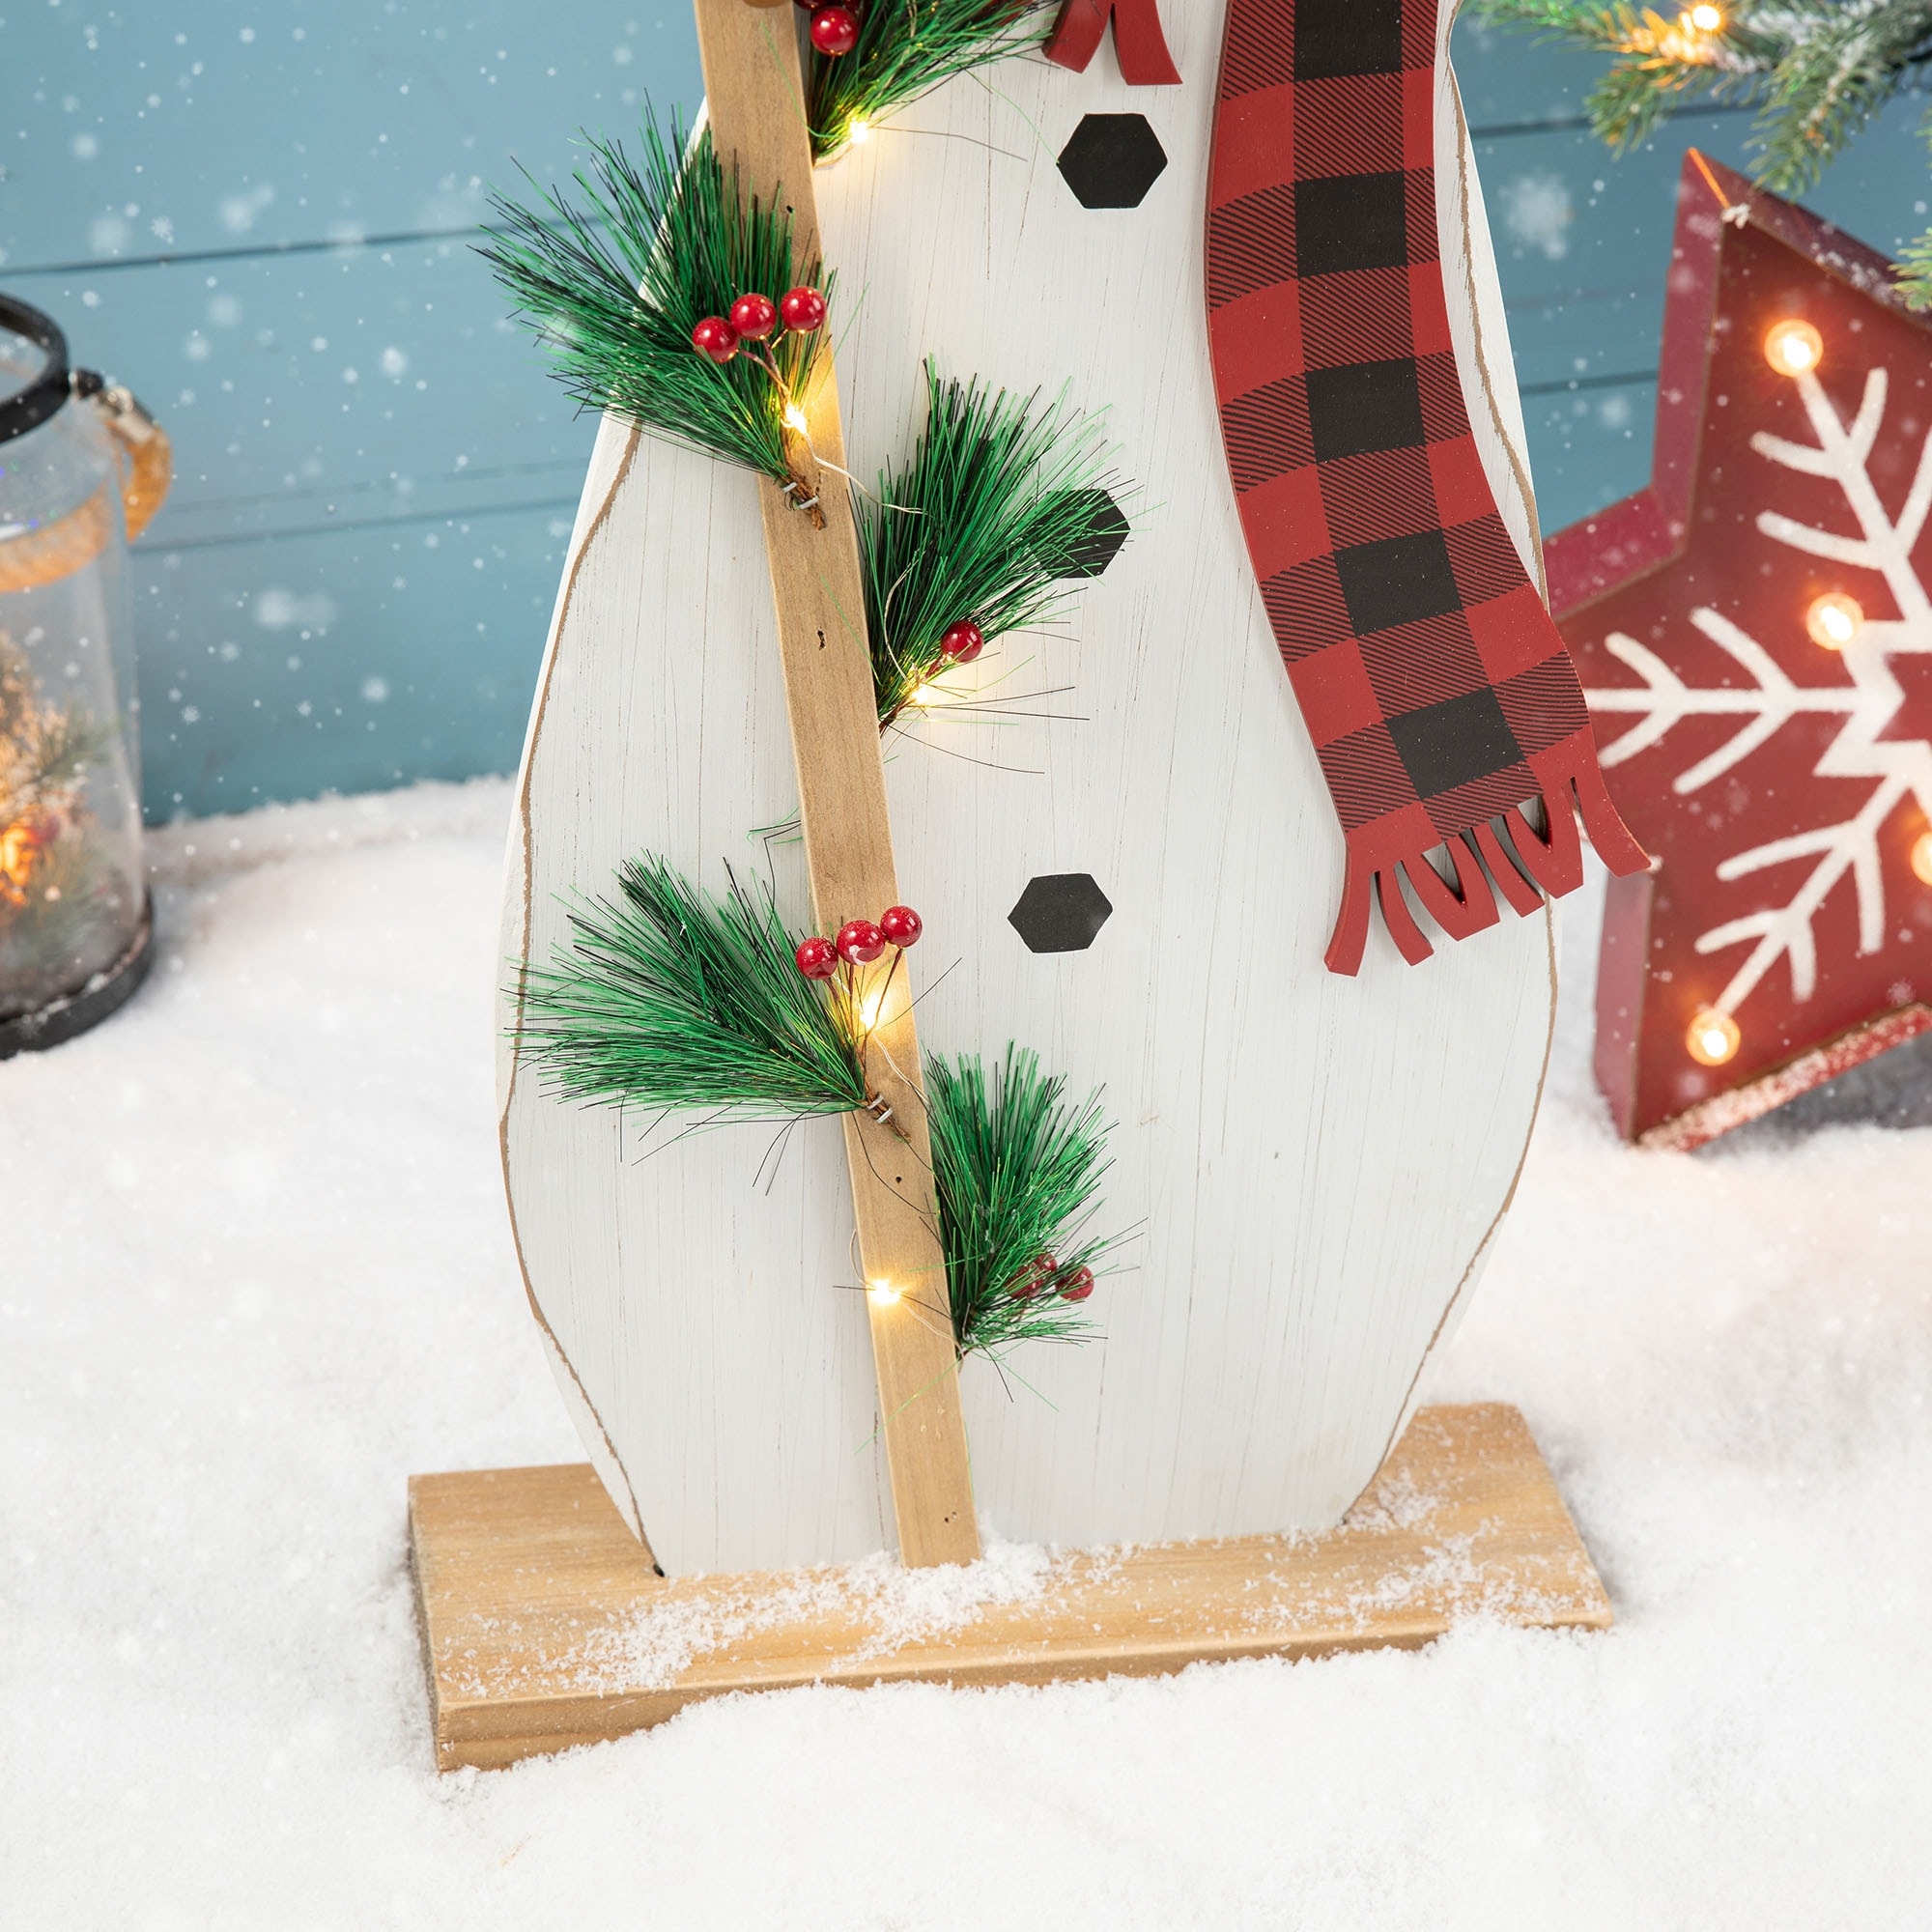 Glitzhome 36 in. H Lighted Wooden Snowman Porch Decor Christmas